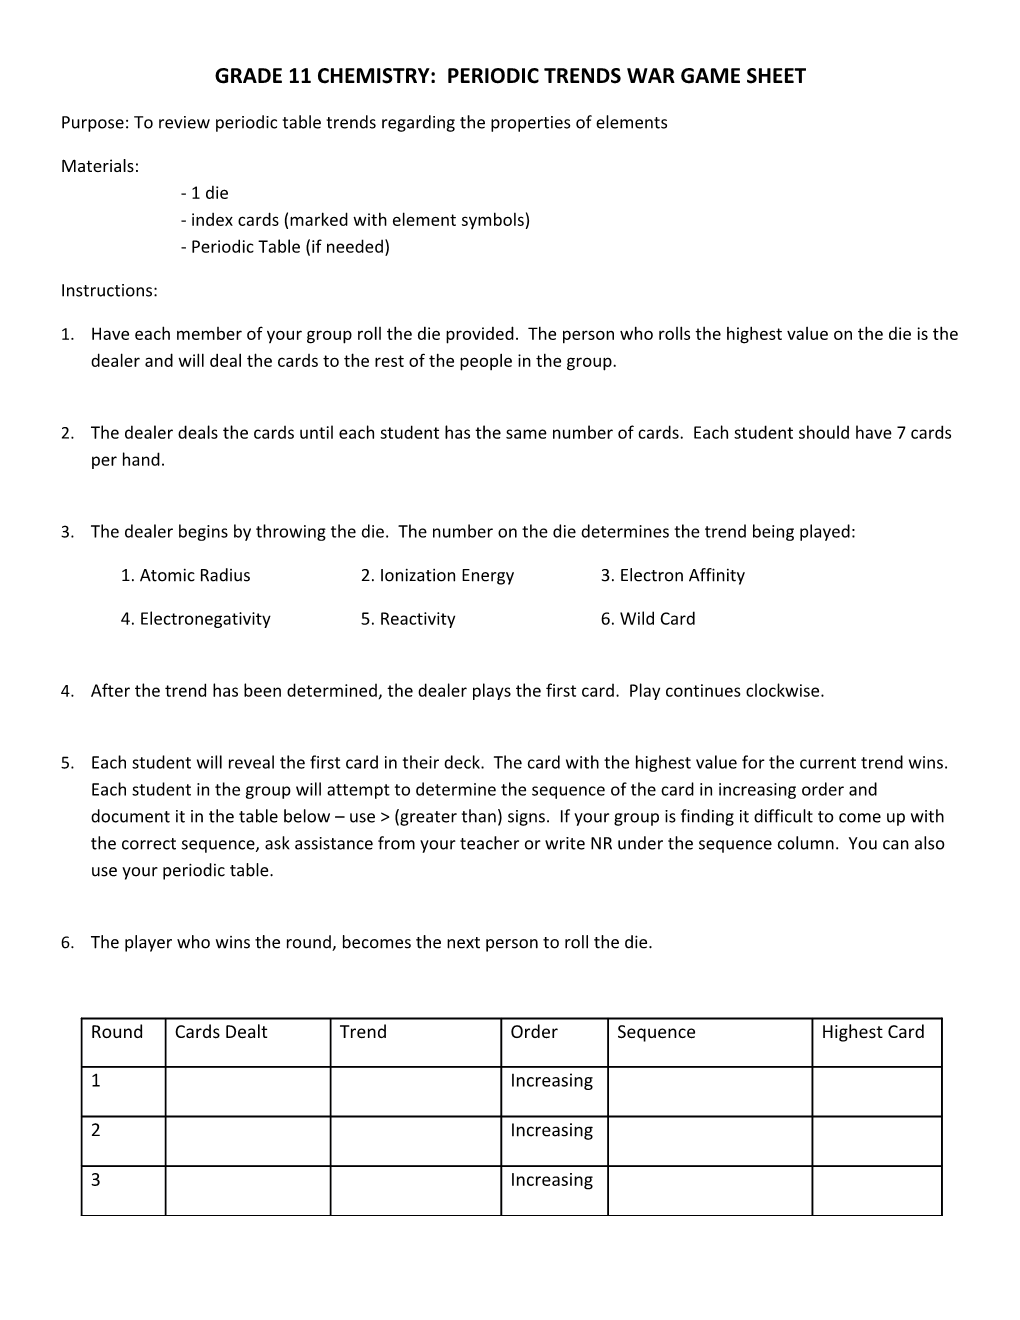 Grade 11 Chemistry: Periodic Trends War Game Sheet